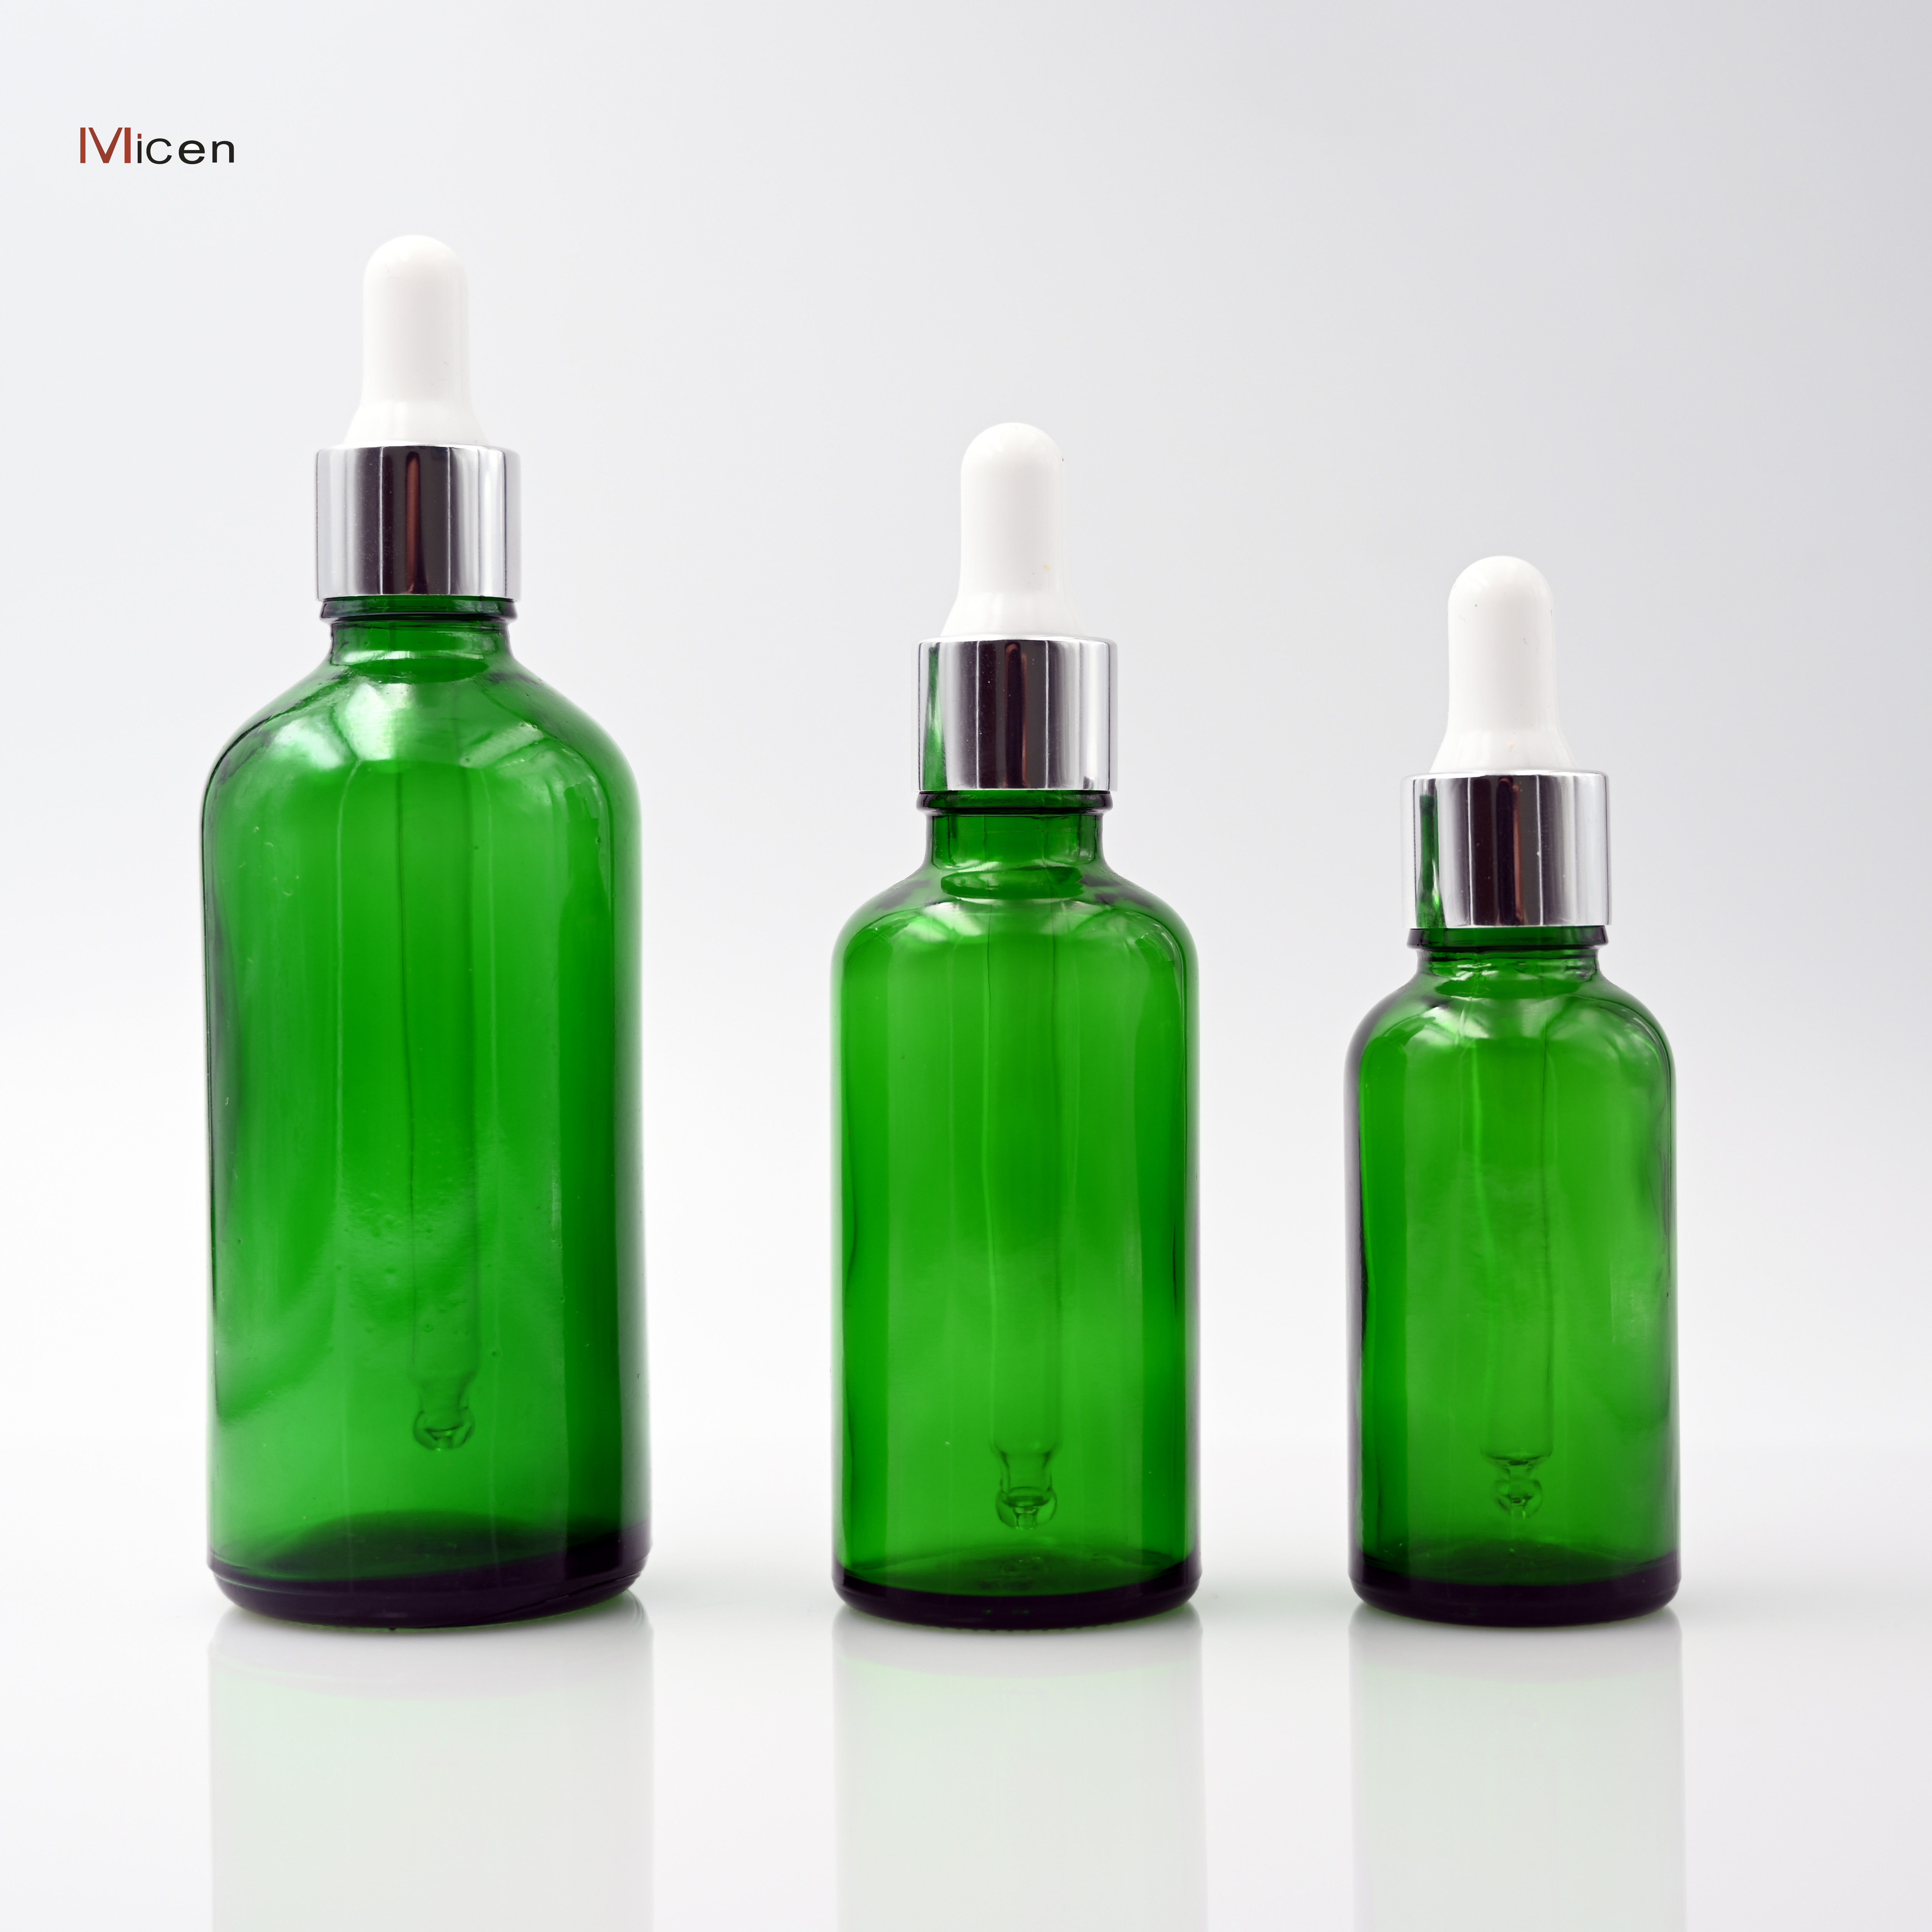 5-100ml Green glass bottle with dropper Featured Image